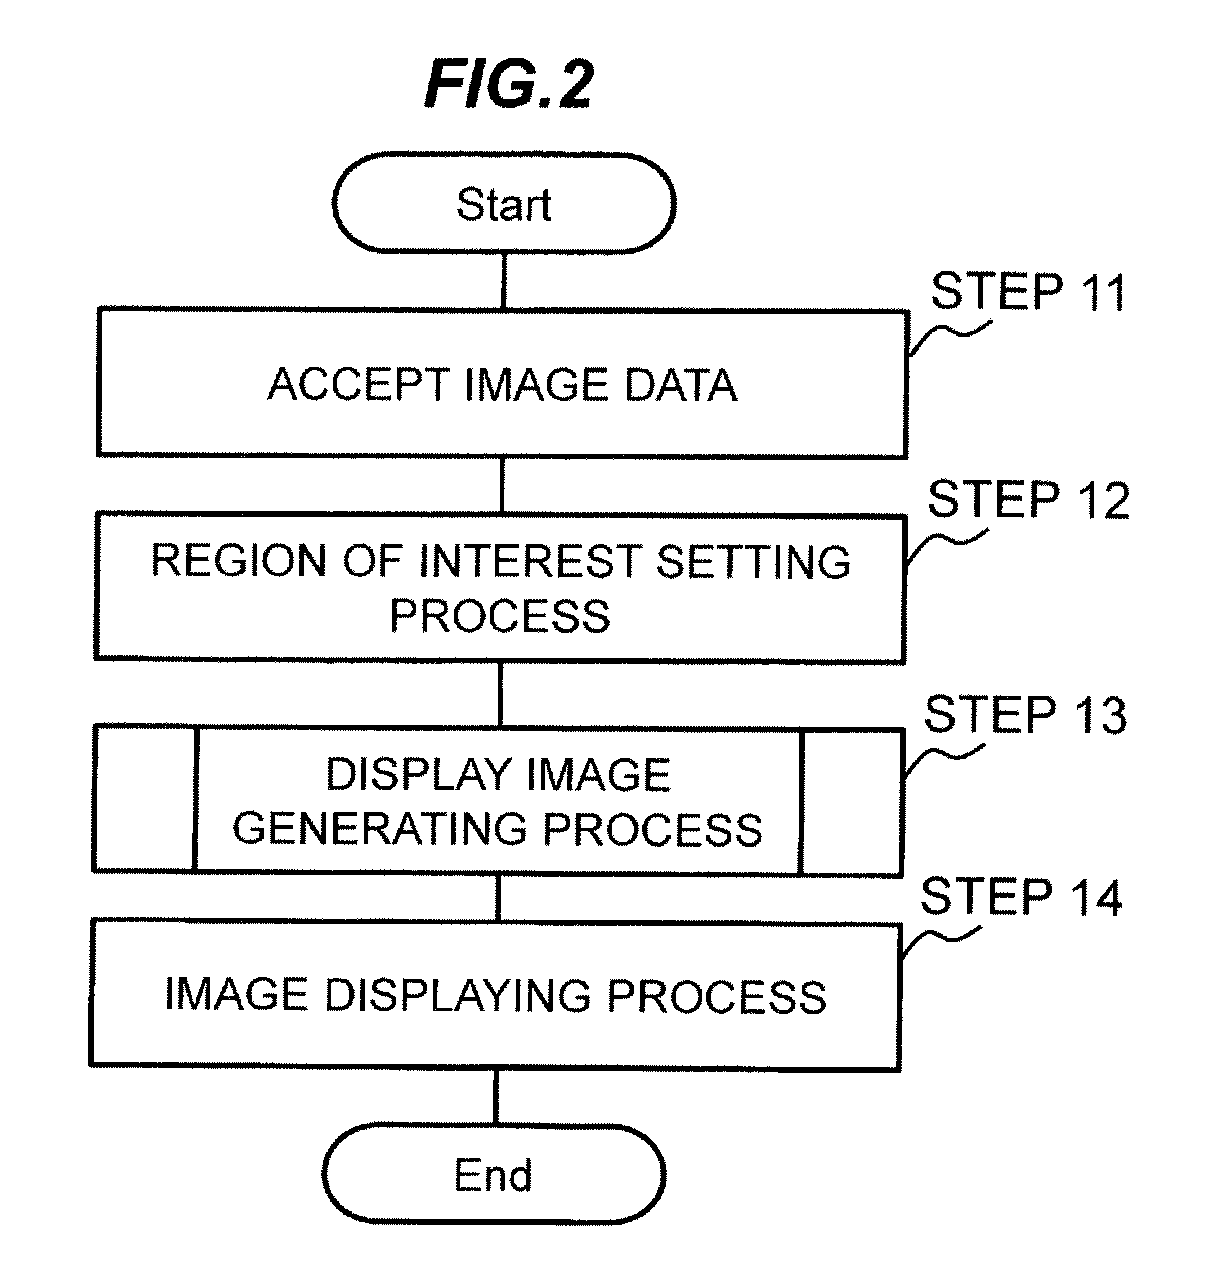 Image display device for medical applications, image display method for medical applications